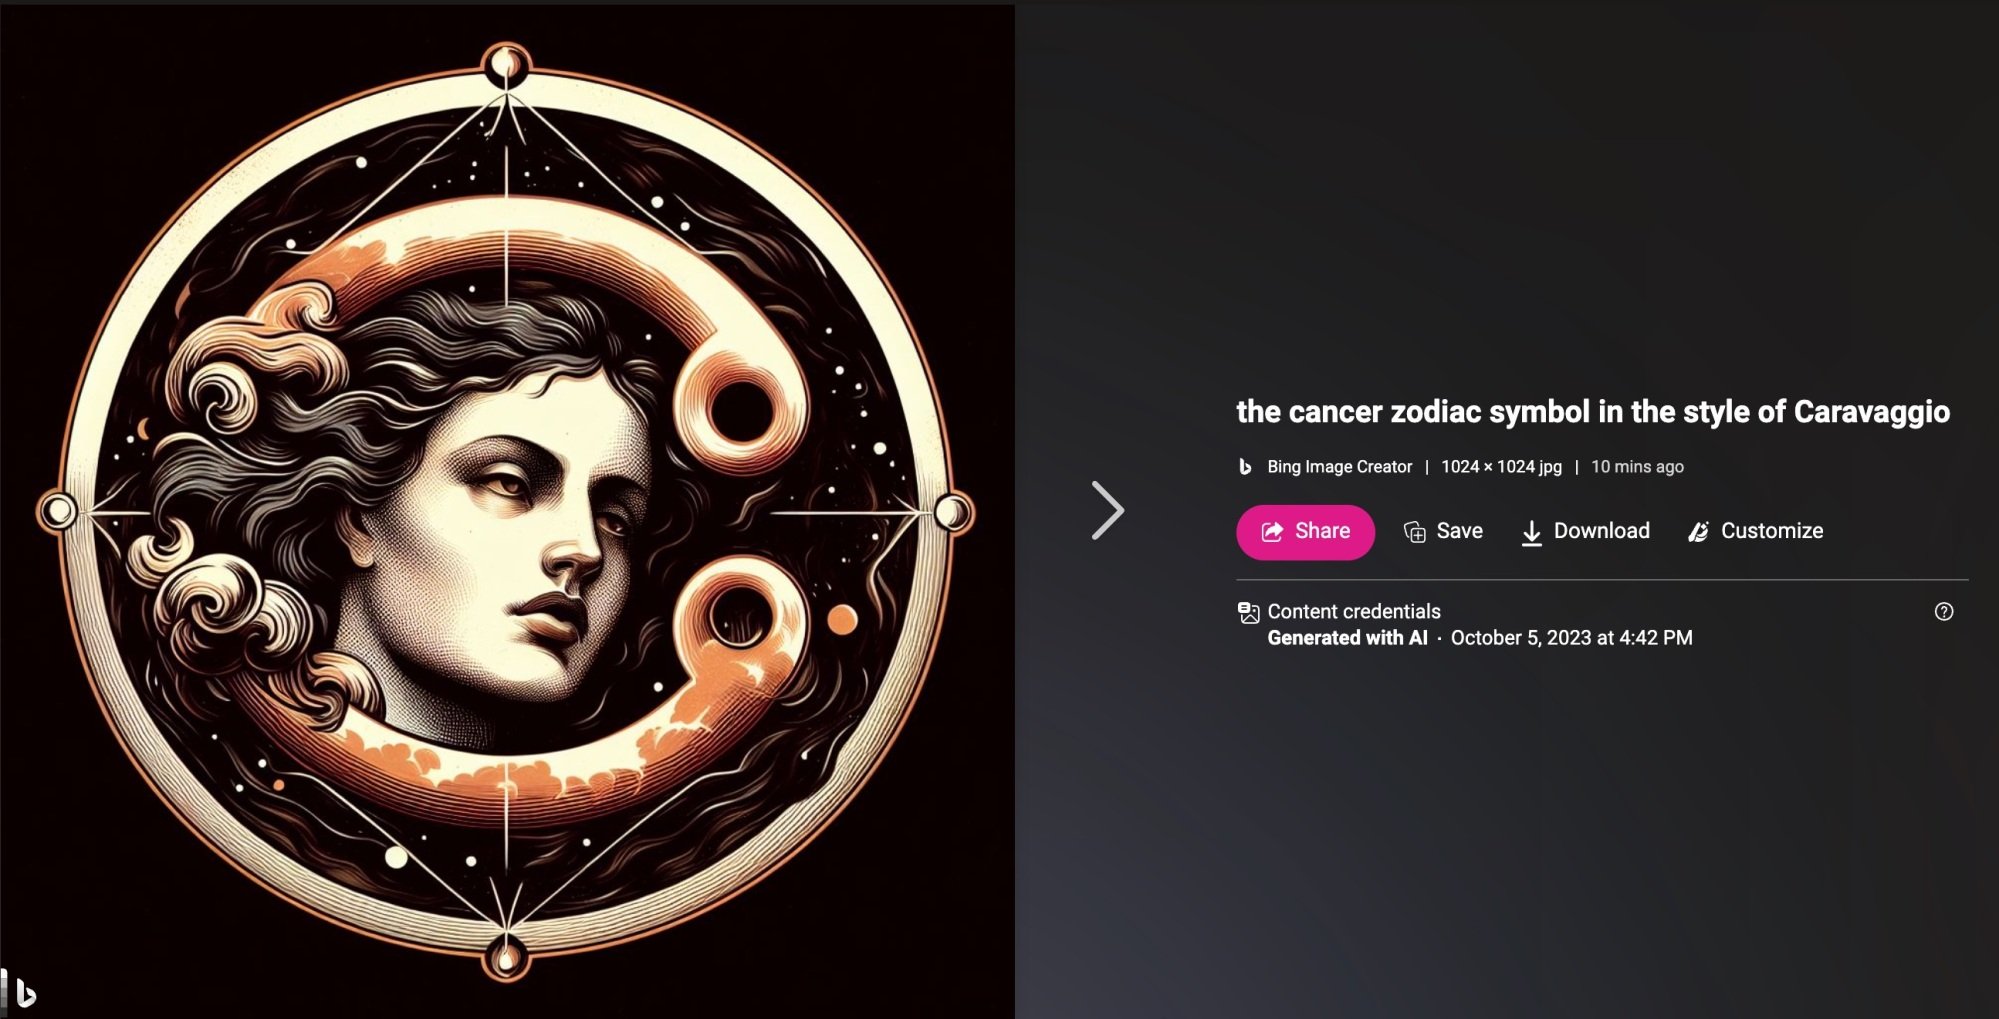 Bing Image Creator AI-generated image of the Cancer zodiac symbol in the style of Caravaggio